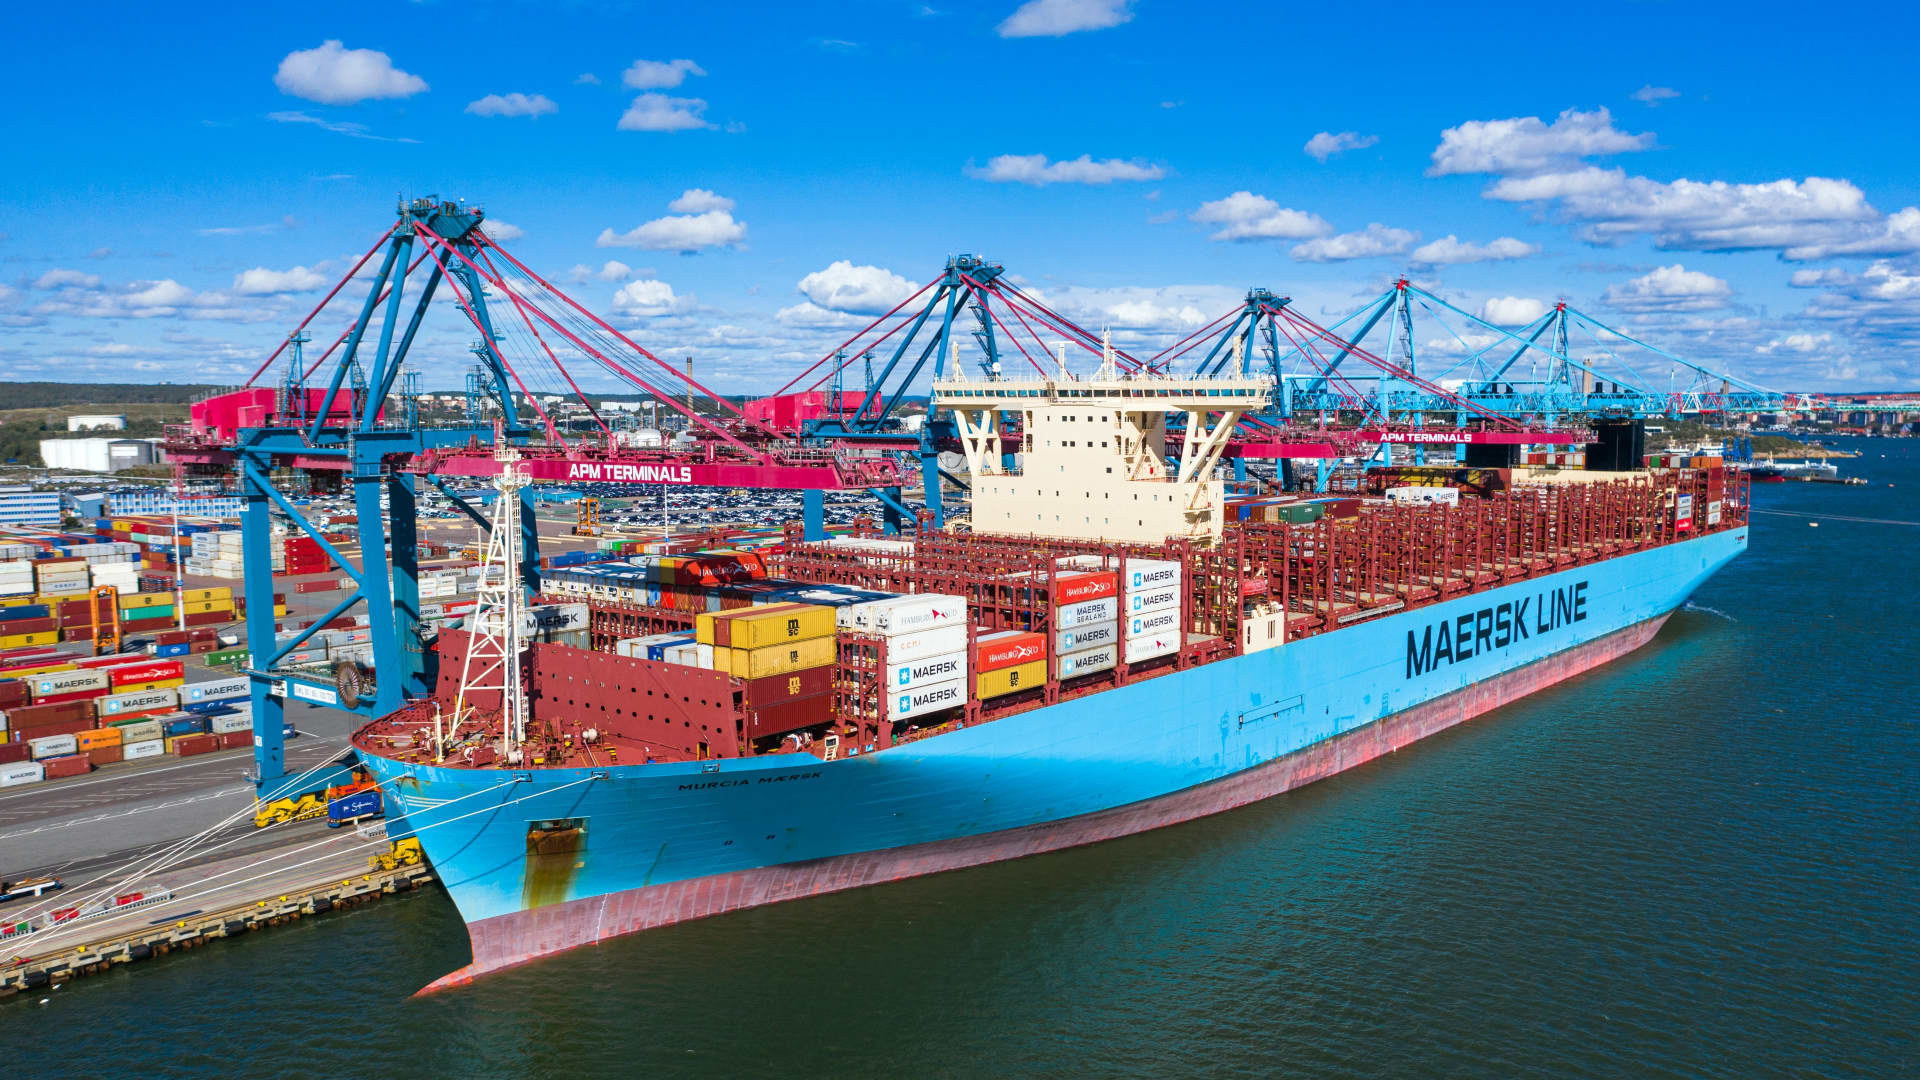 Shipping giant Maersk announces 10,000 job cuts, warns of volatility